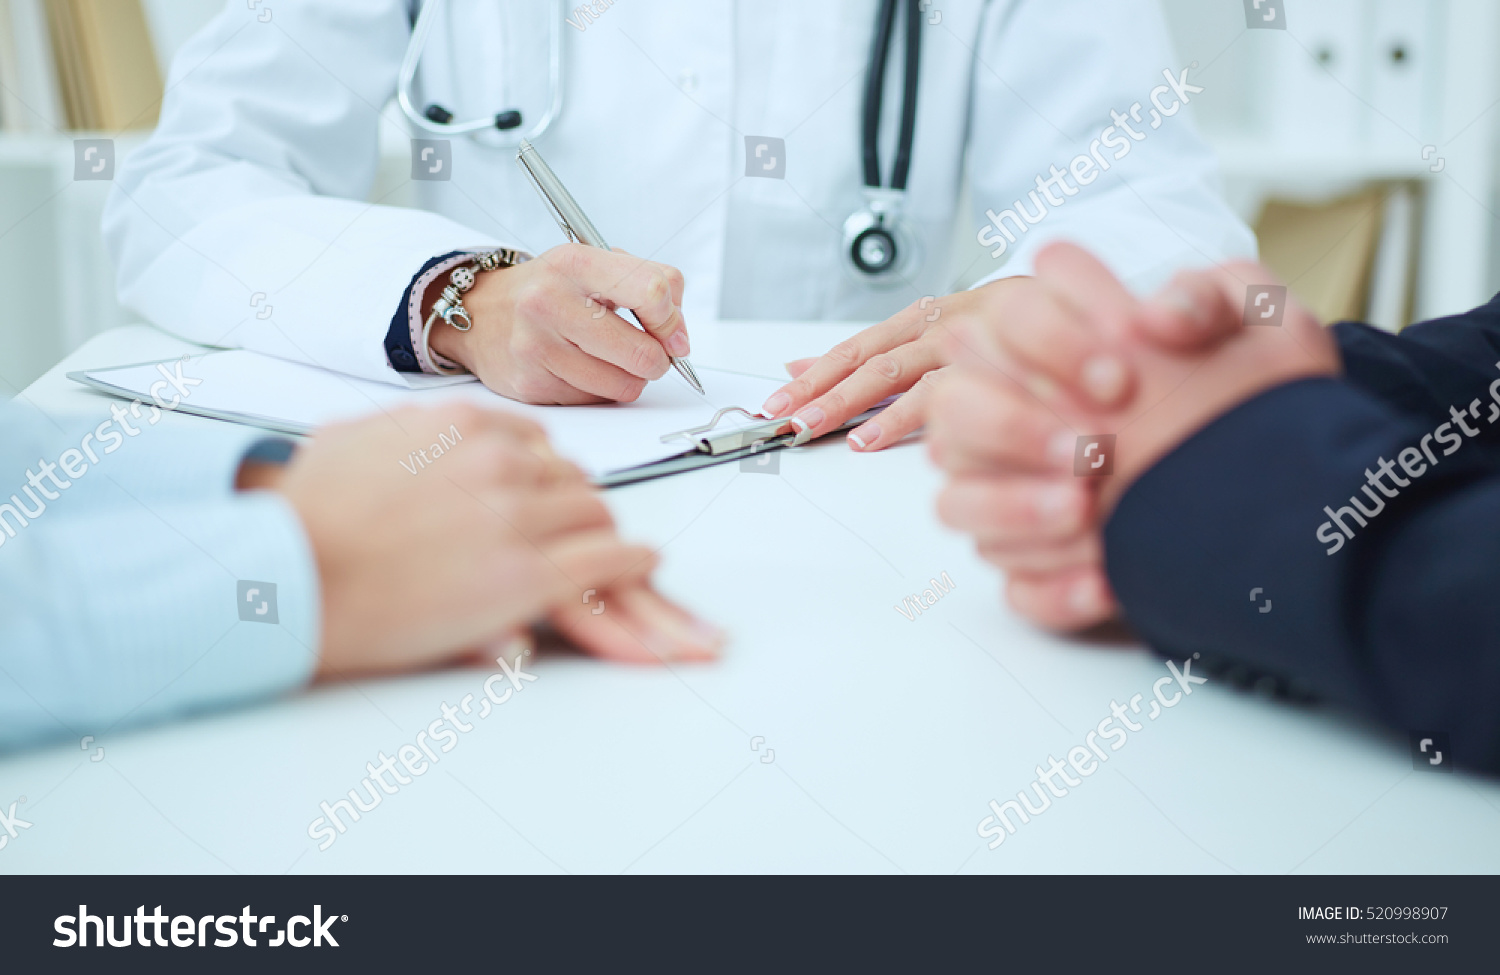 Female medicine doctor hand holding silver pen writing something on clipboard closeup. Ward round, patient visit check, medical calculation and statistics concept. Physician ready to examine patient #520998907